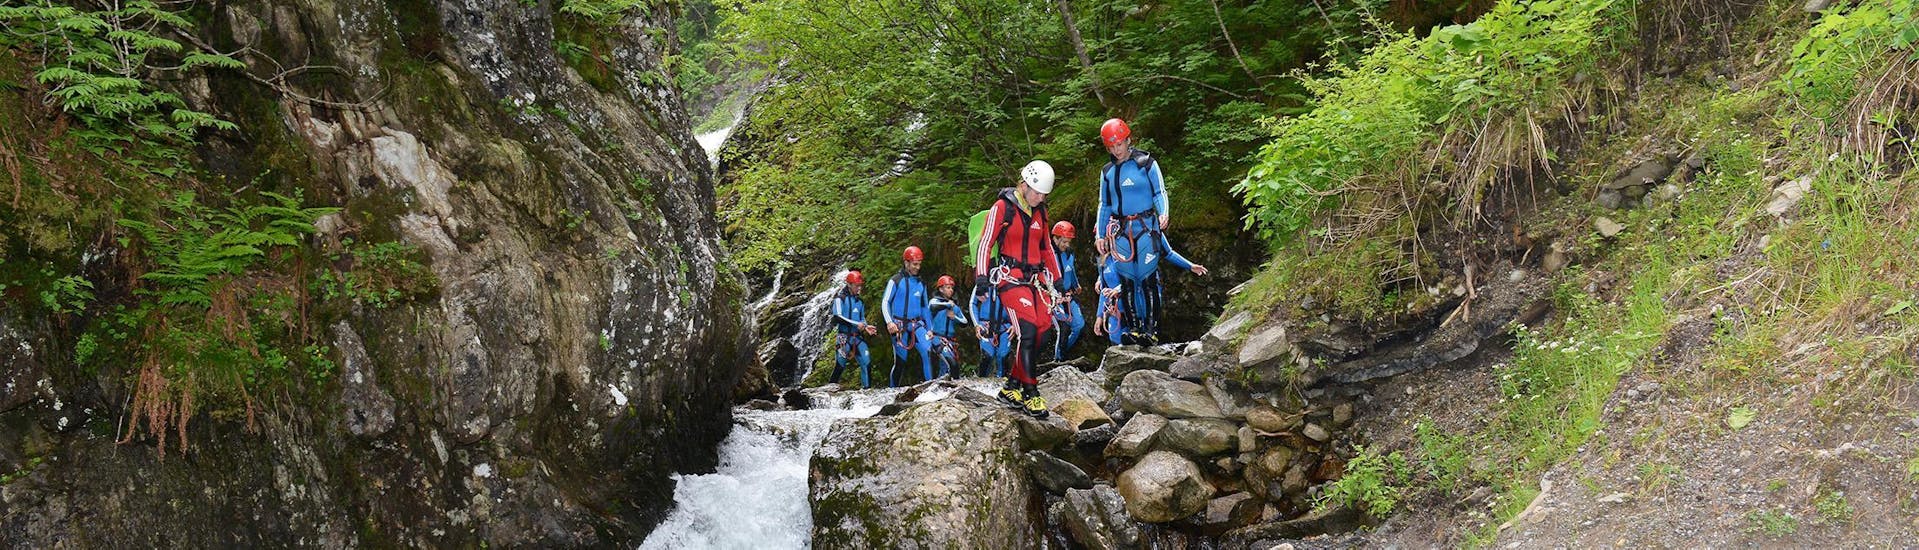 Canyoning in Alpenrosenklamm from Haiming - King of the Alps with Outdoor Ötztal.